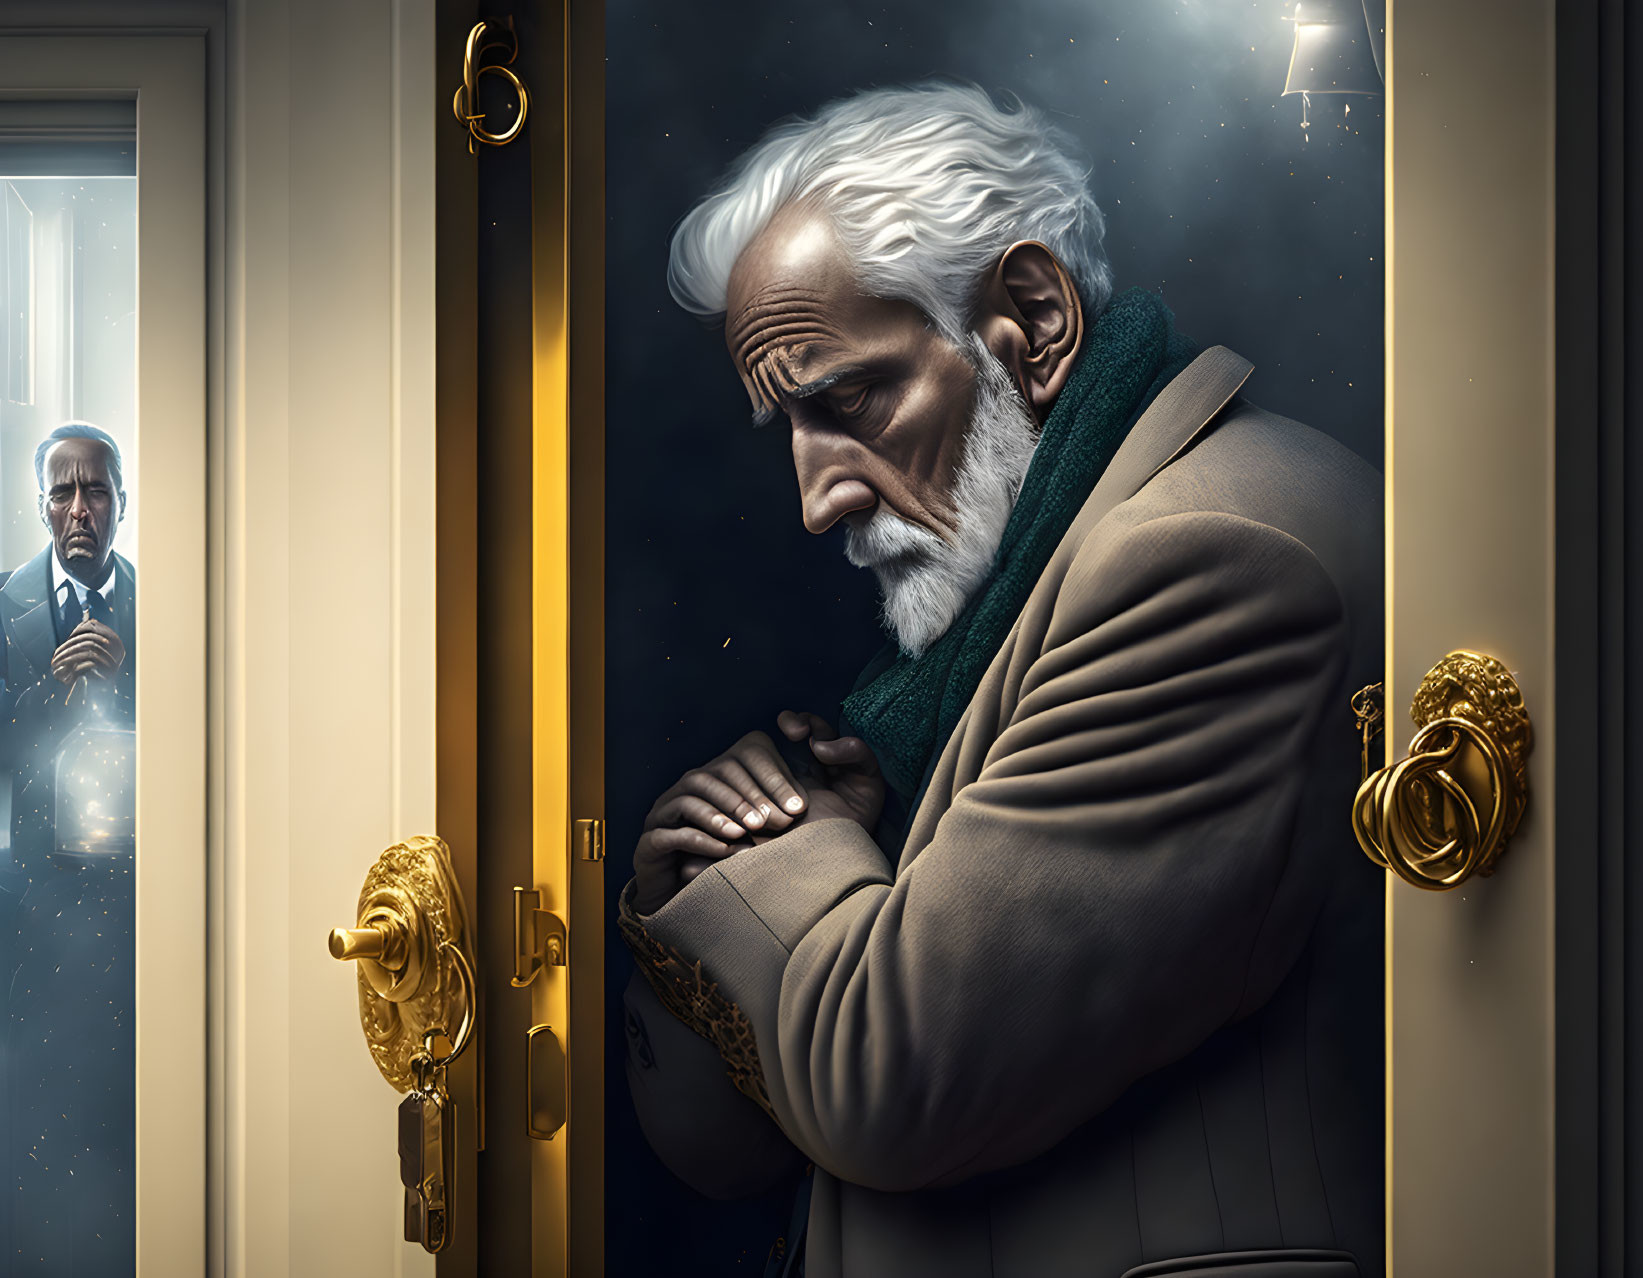 Elderly man with white beard gazes into star-filled room with reflection of another man